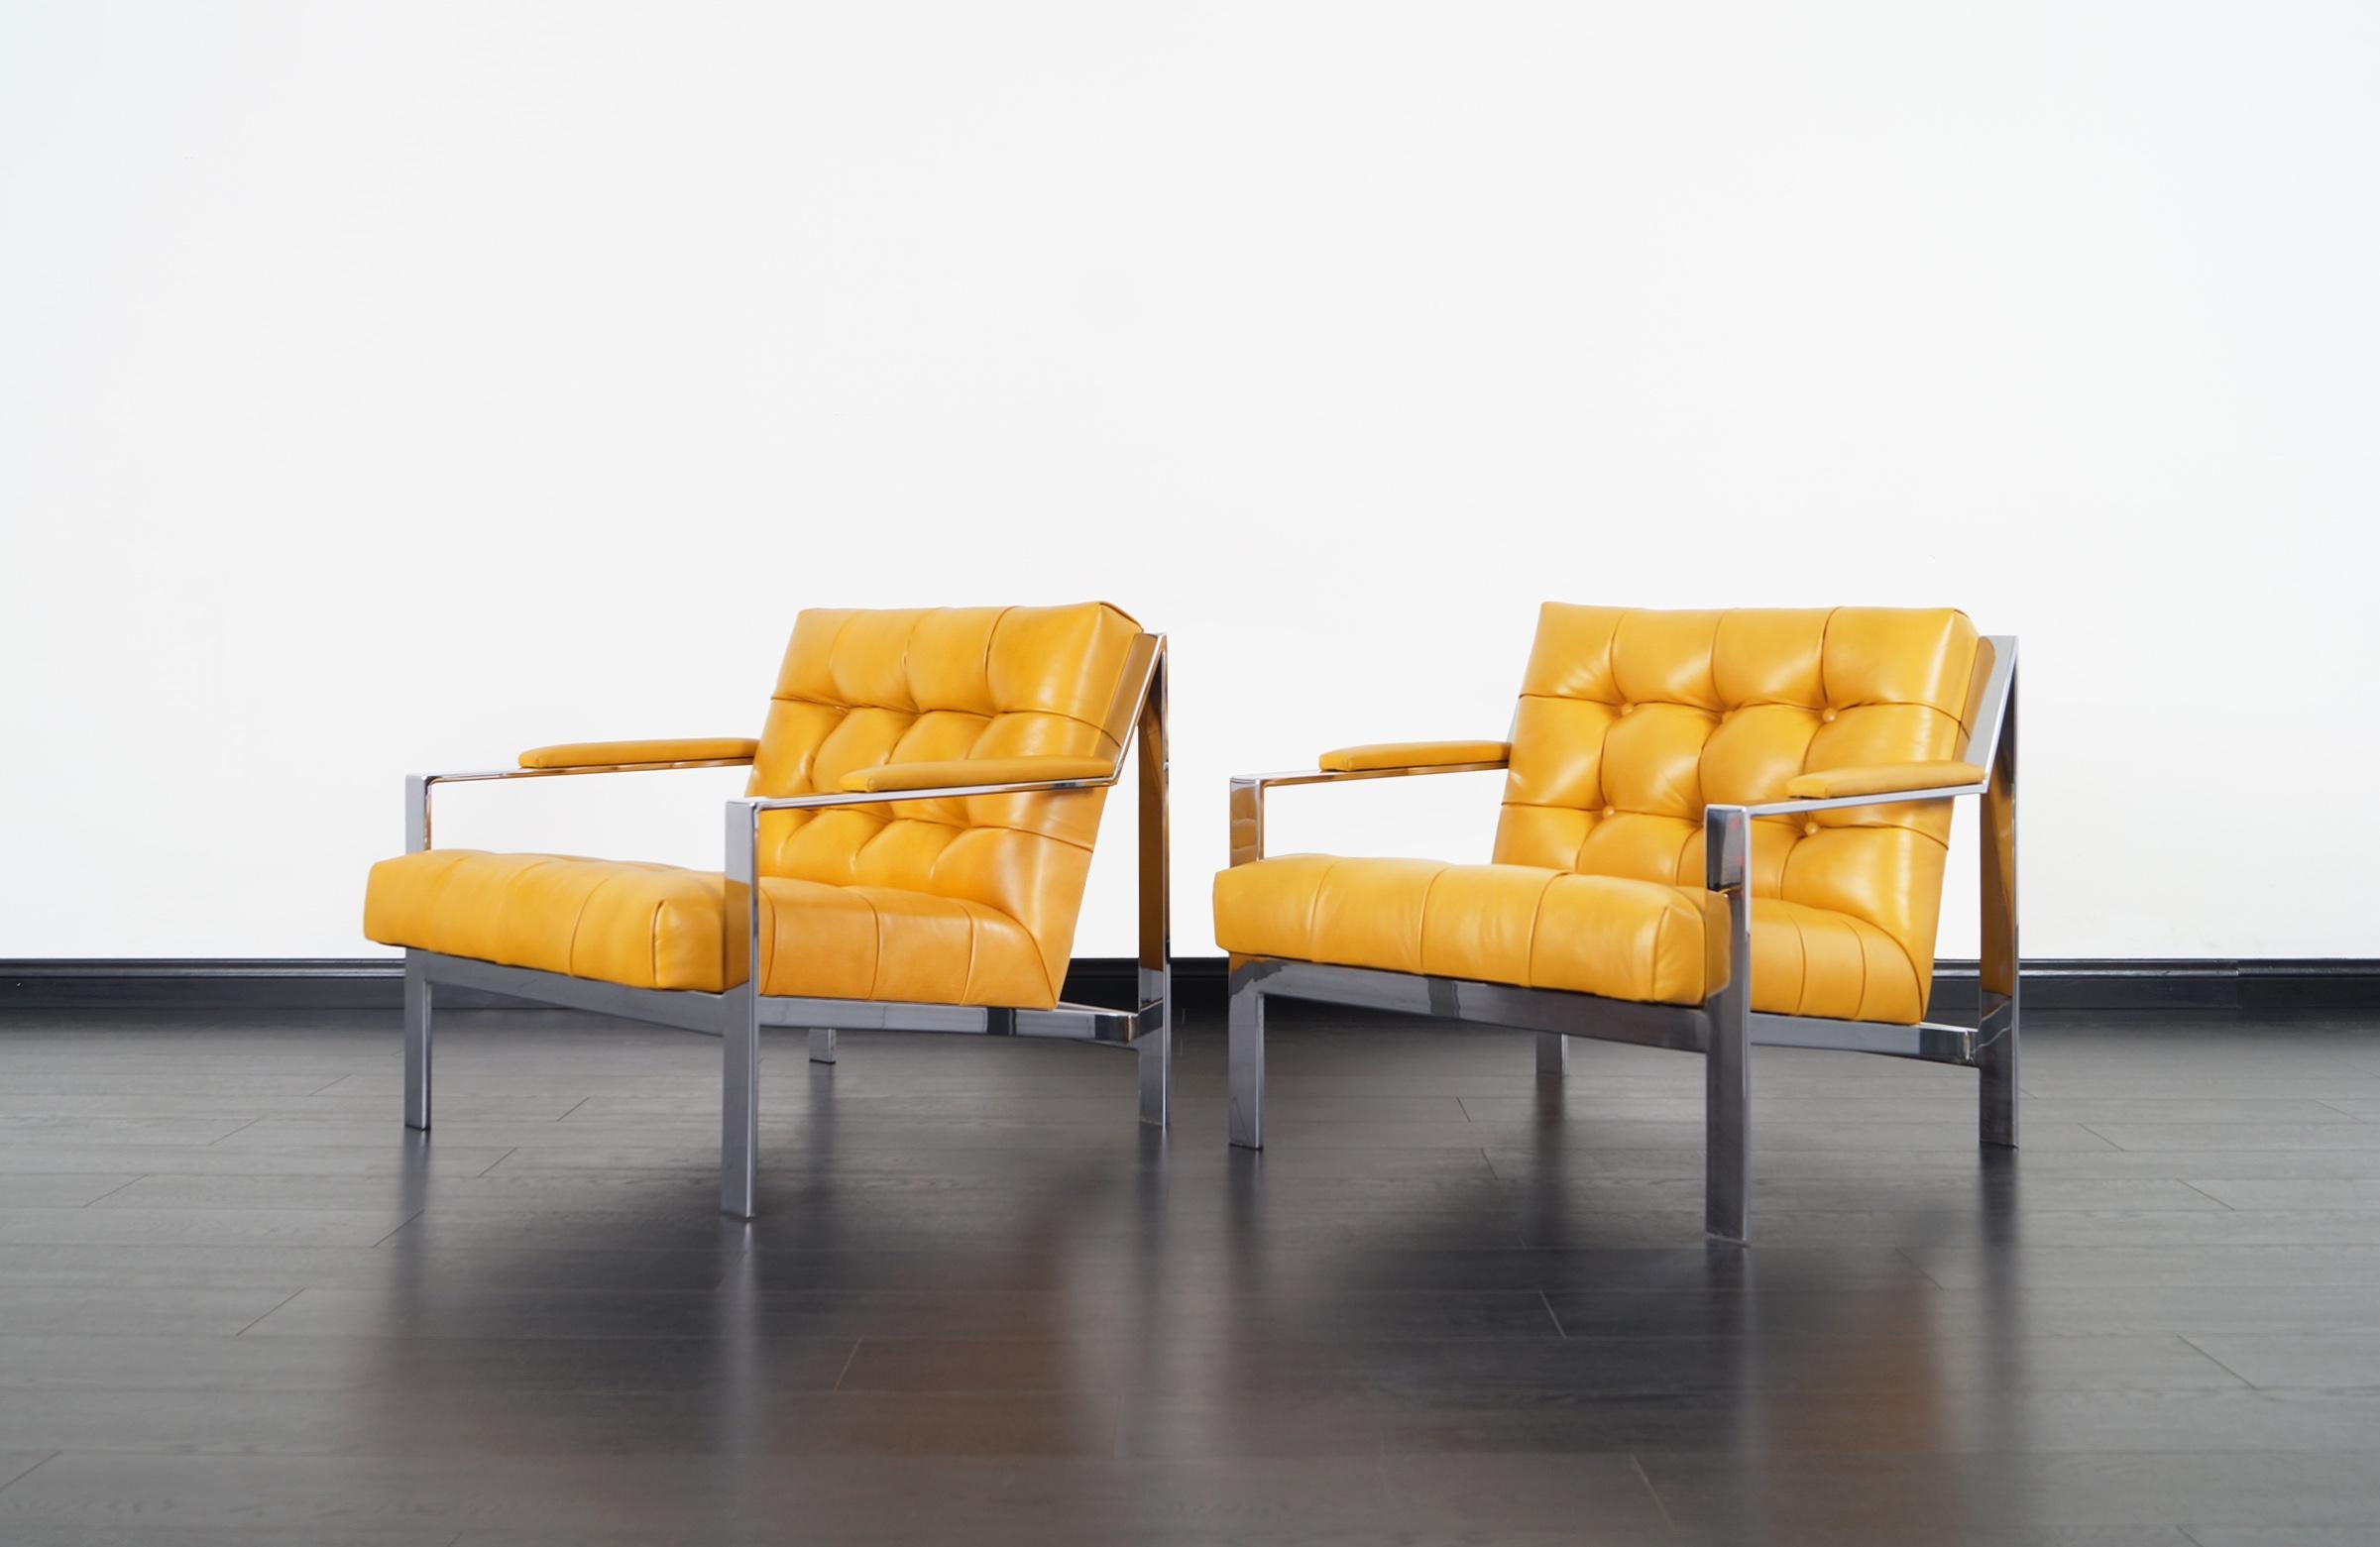 Vintage Chrome and Leather Biscuit Tufted Lounge Chairs by Cy Mann (Moderne der Mitte des Jahrhunderts)